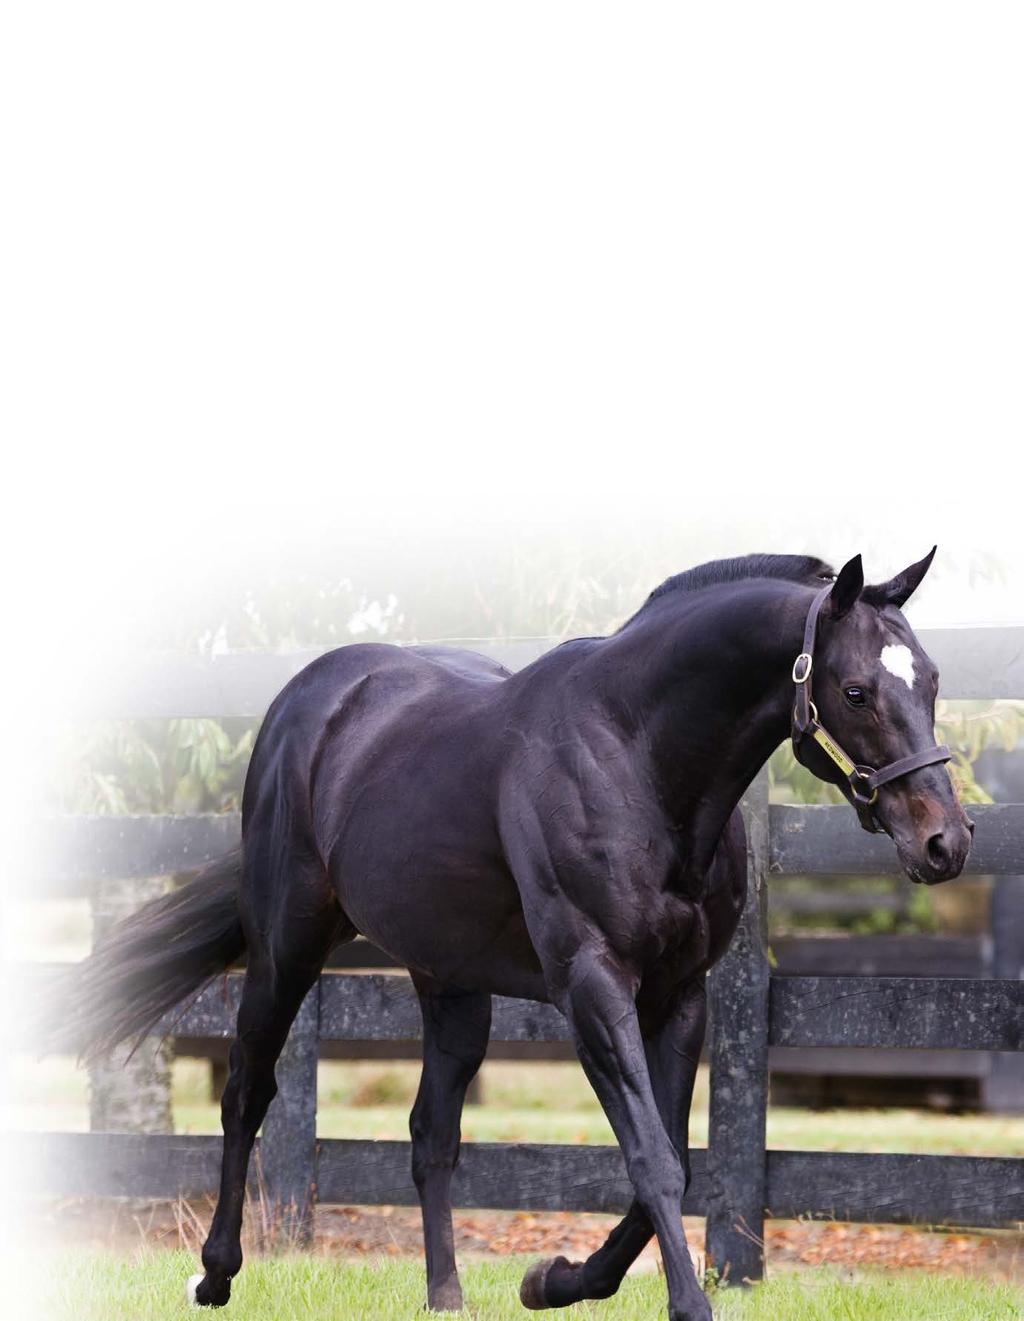 Westbury Stud & the Redwood Syndicate are proud to partner with Robert Logan & the Cancer Society by auctioning one 2015 stallion nomination to the Group 1 winning son of High Chaparral REDWOOD All